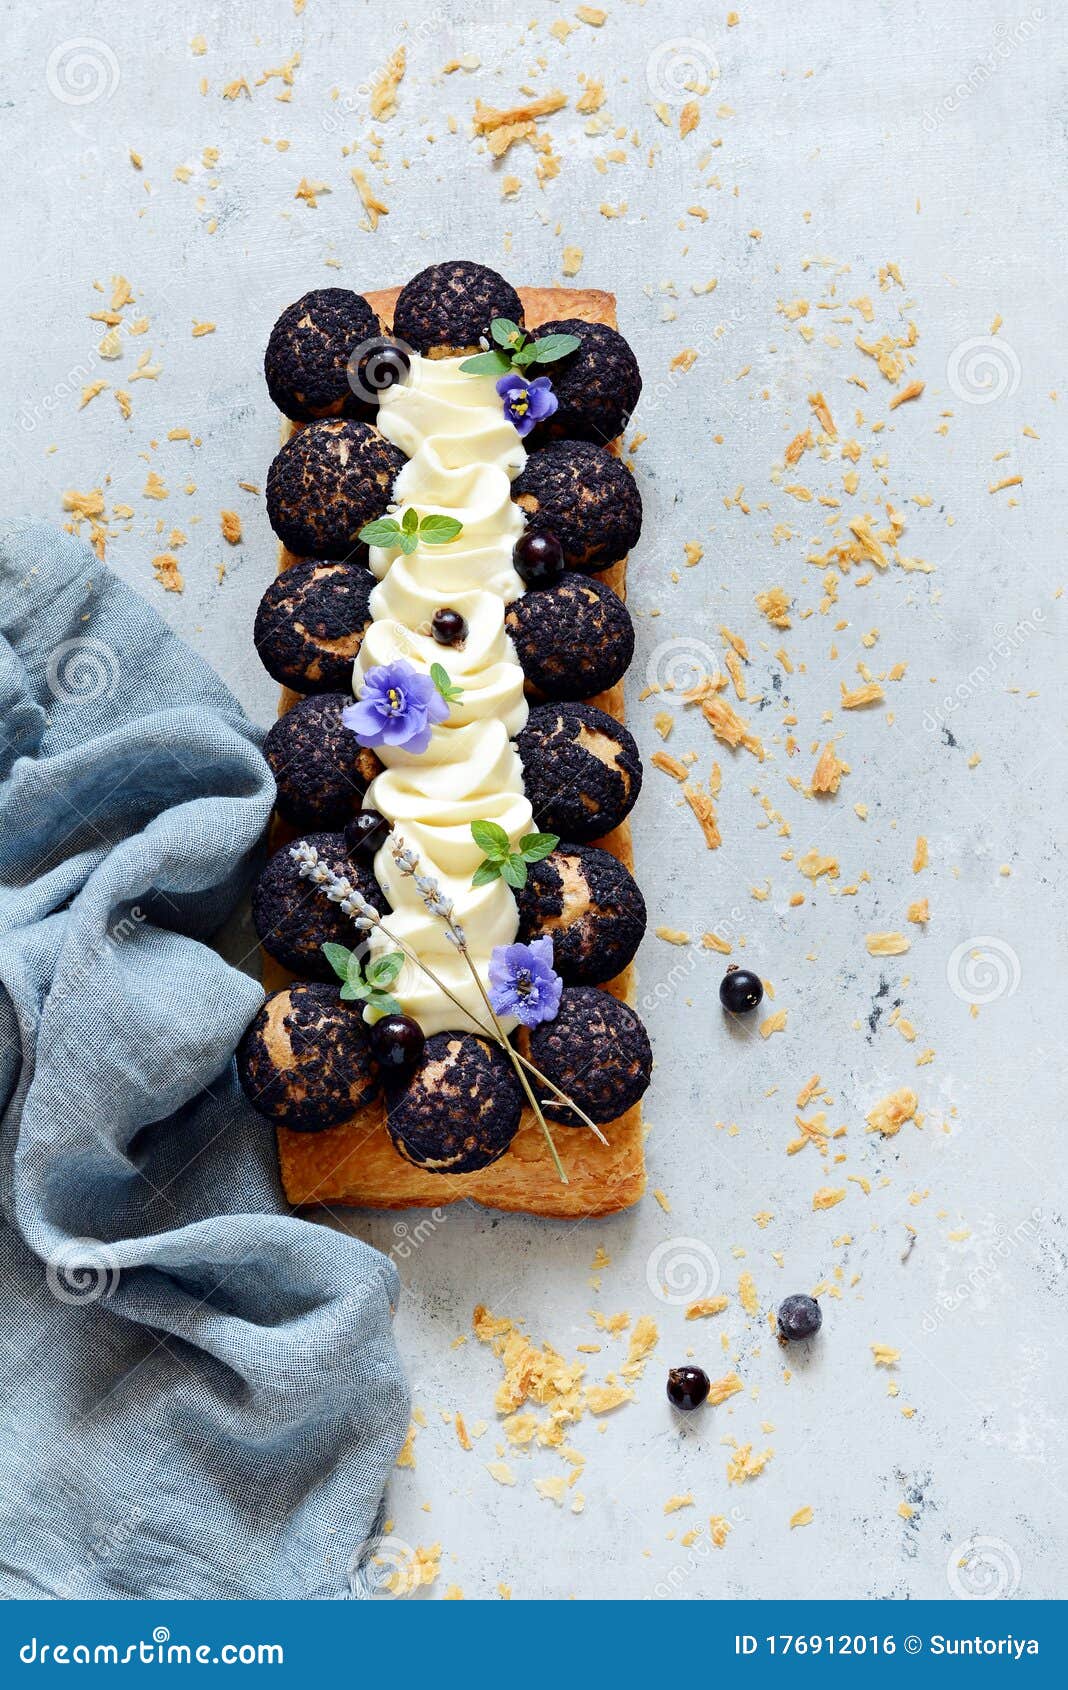 dessert saint onore. berry pie. puff pastry tart with profiteroles, butter cream, black currant jam with fresh mint, lavender